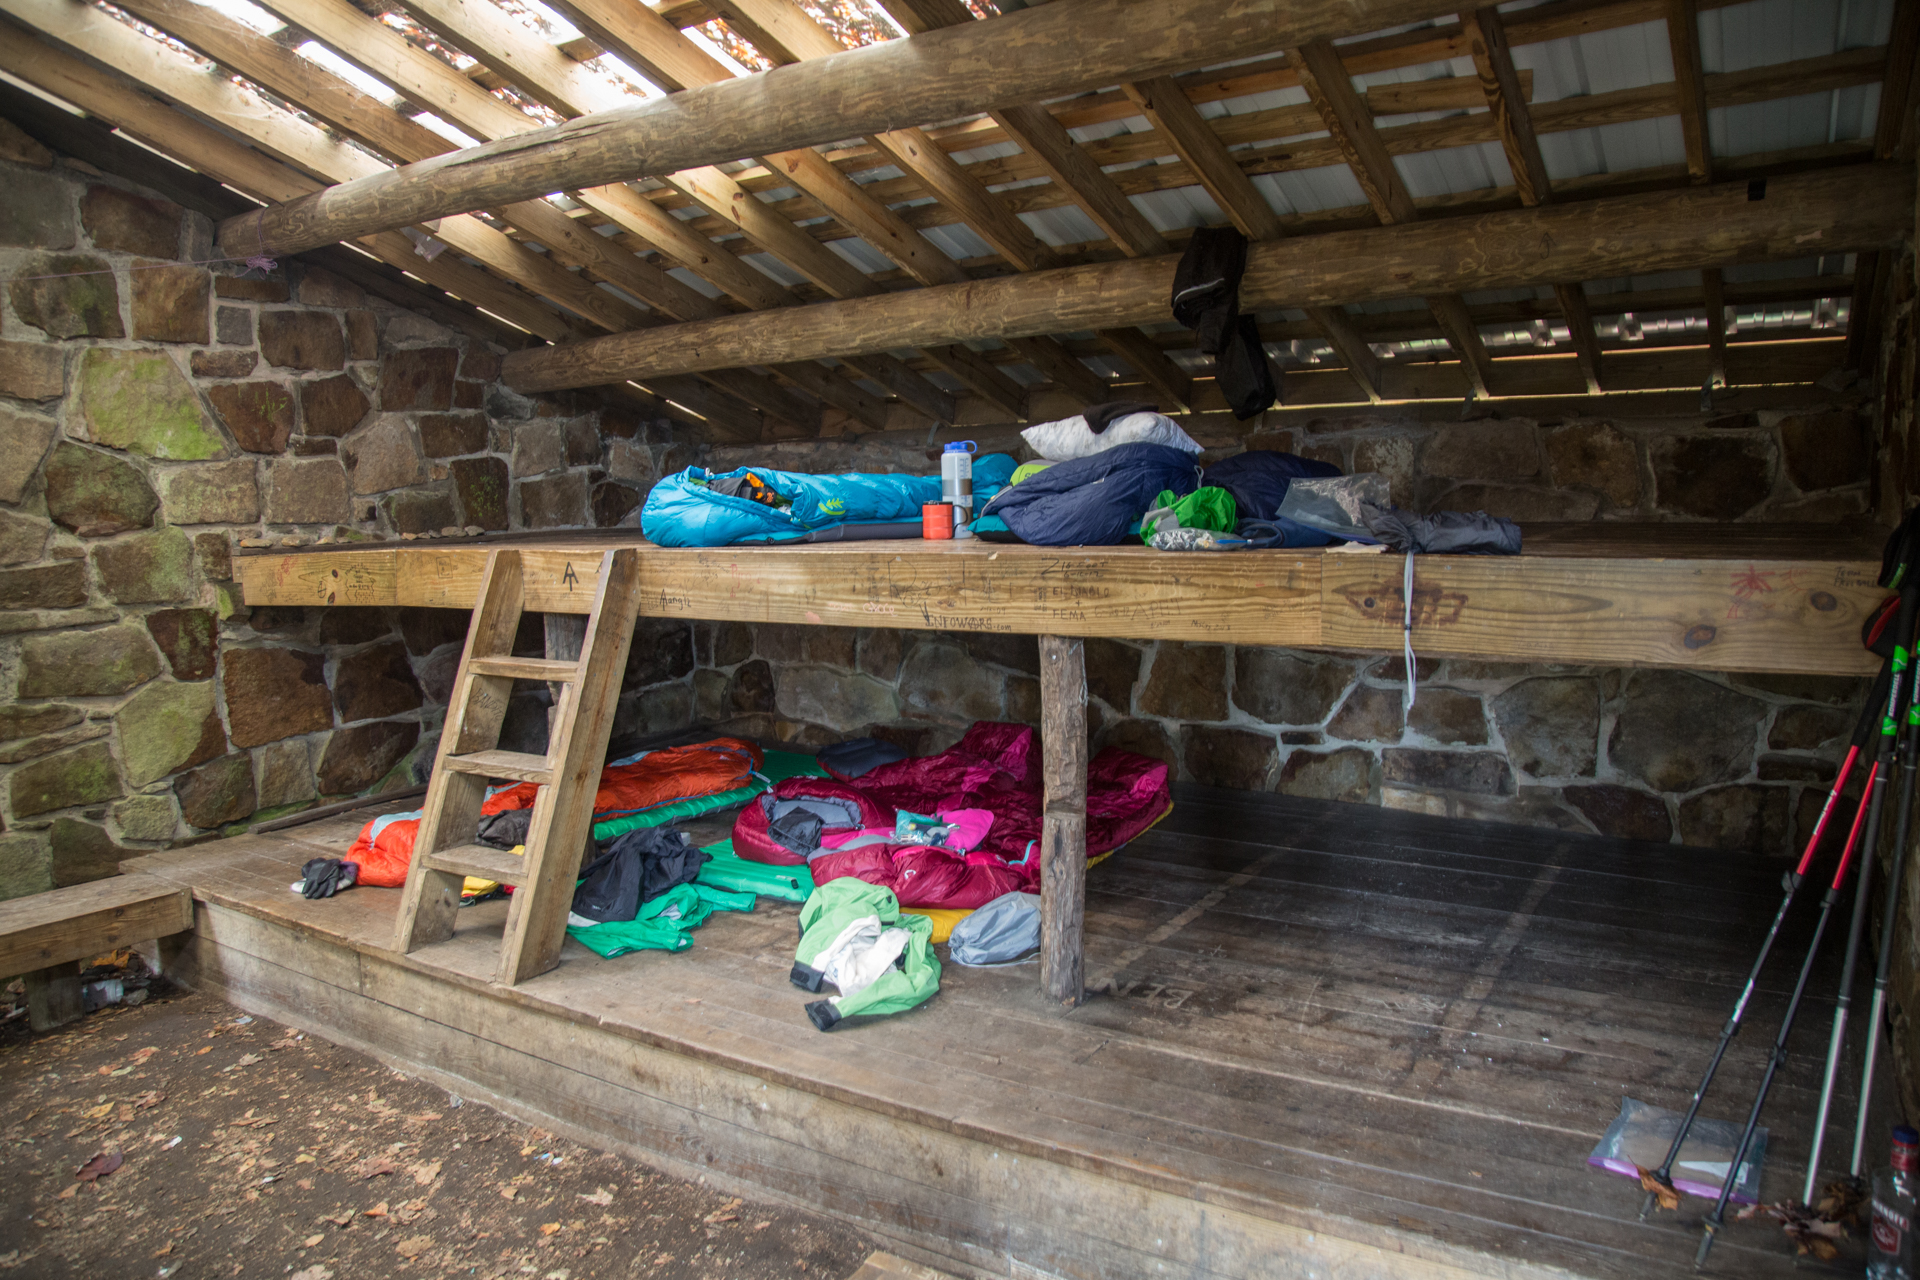 Interior of the shelter with makeshift bunks of wood and gear spread across.